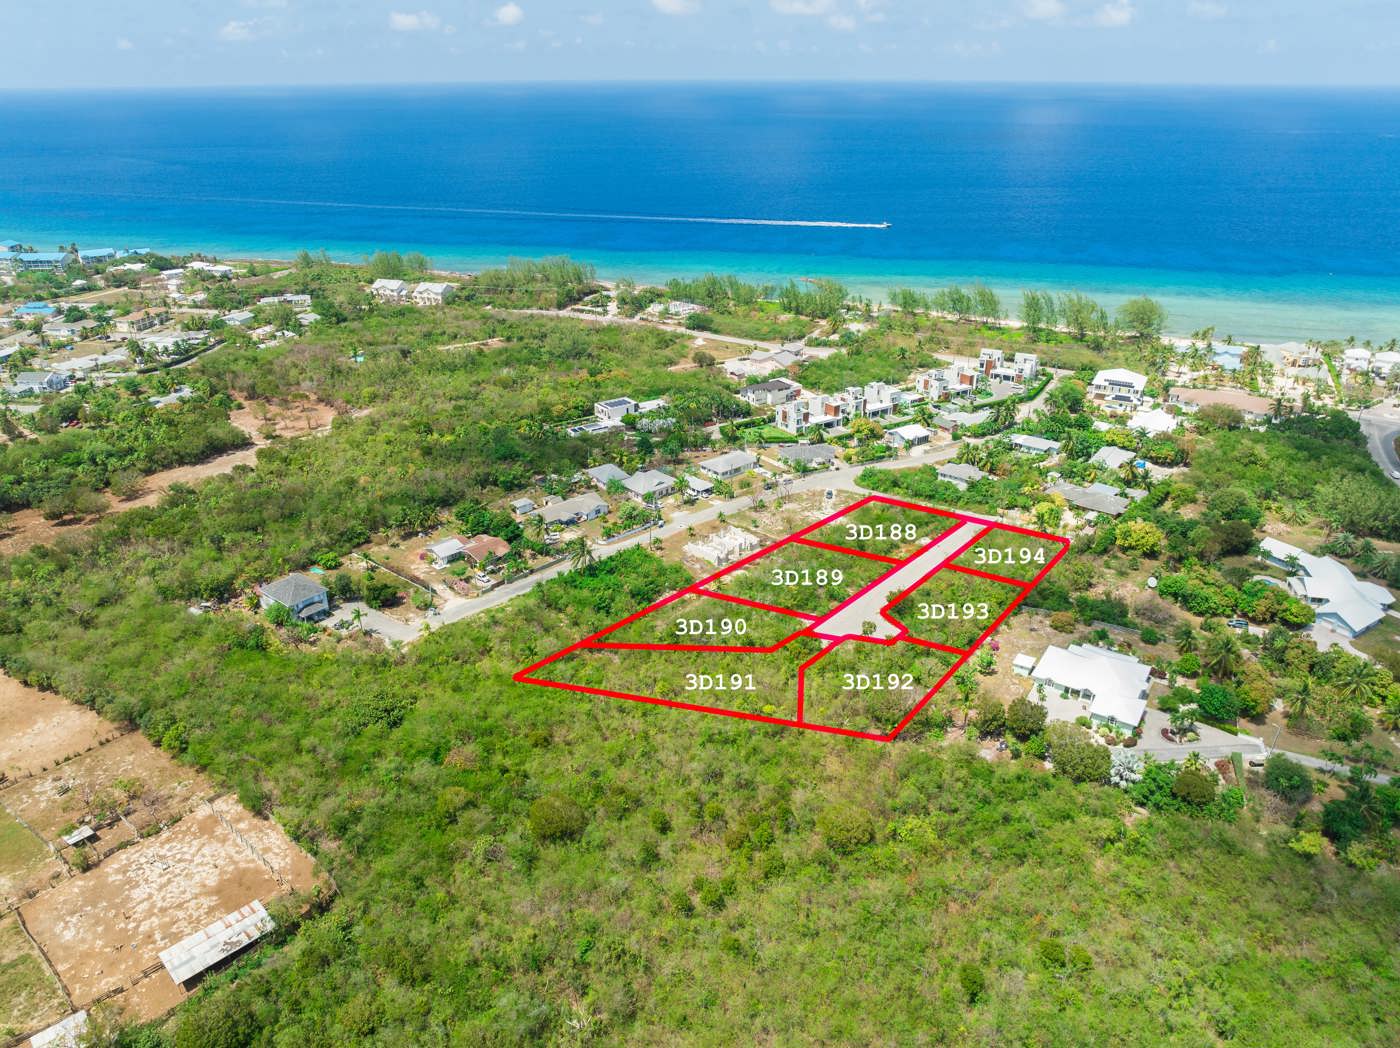 Mahogany Grove Lot # 2 - Off Conch Point Road - West Bay - ecay